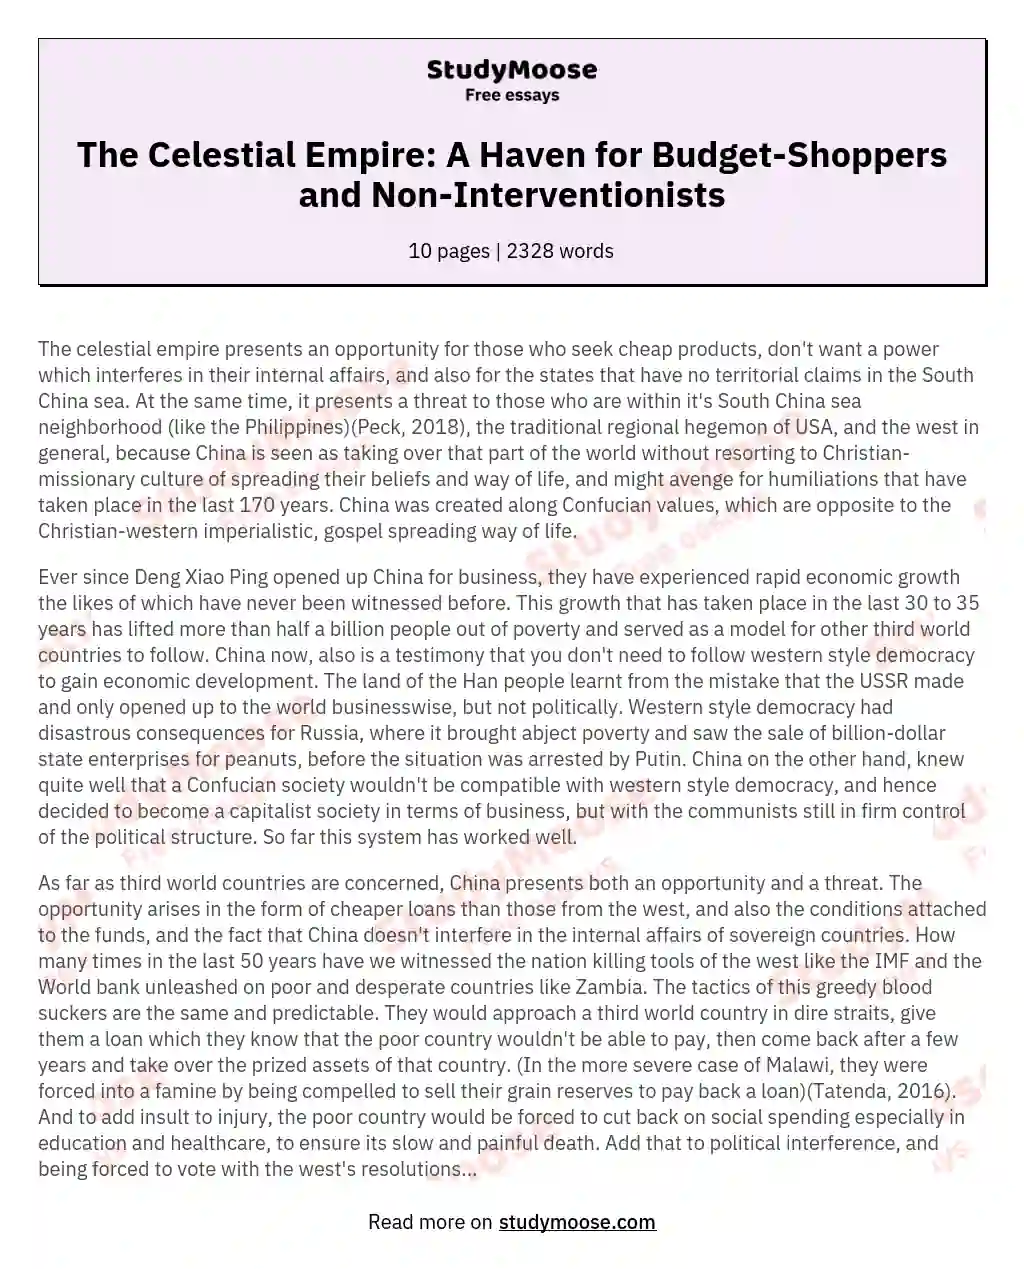 The Celestial Empire: A Haven for Budget-Shoppers and Non-Interventionists essay